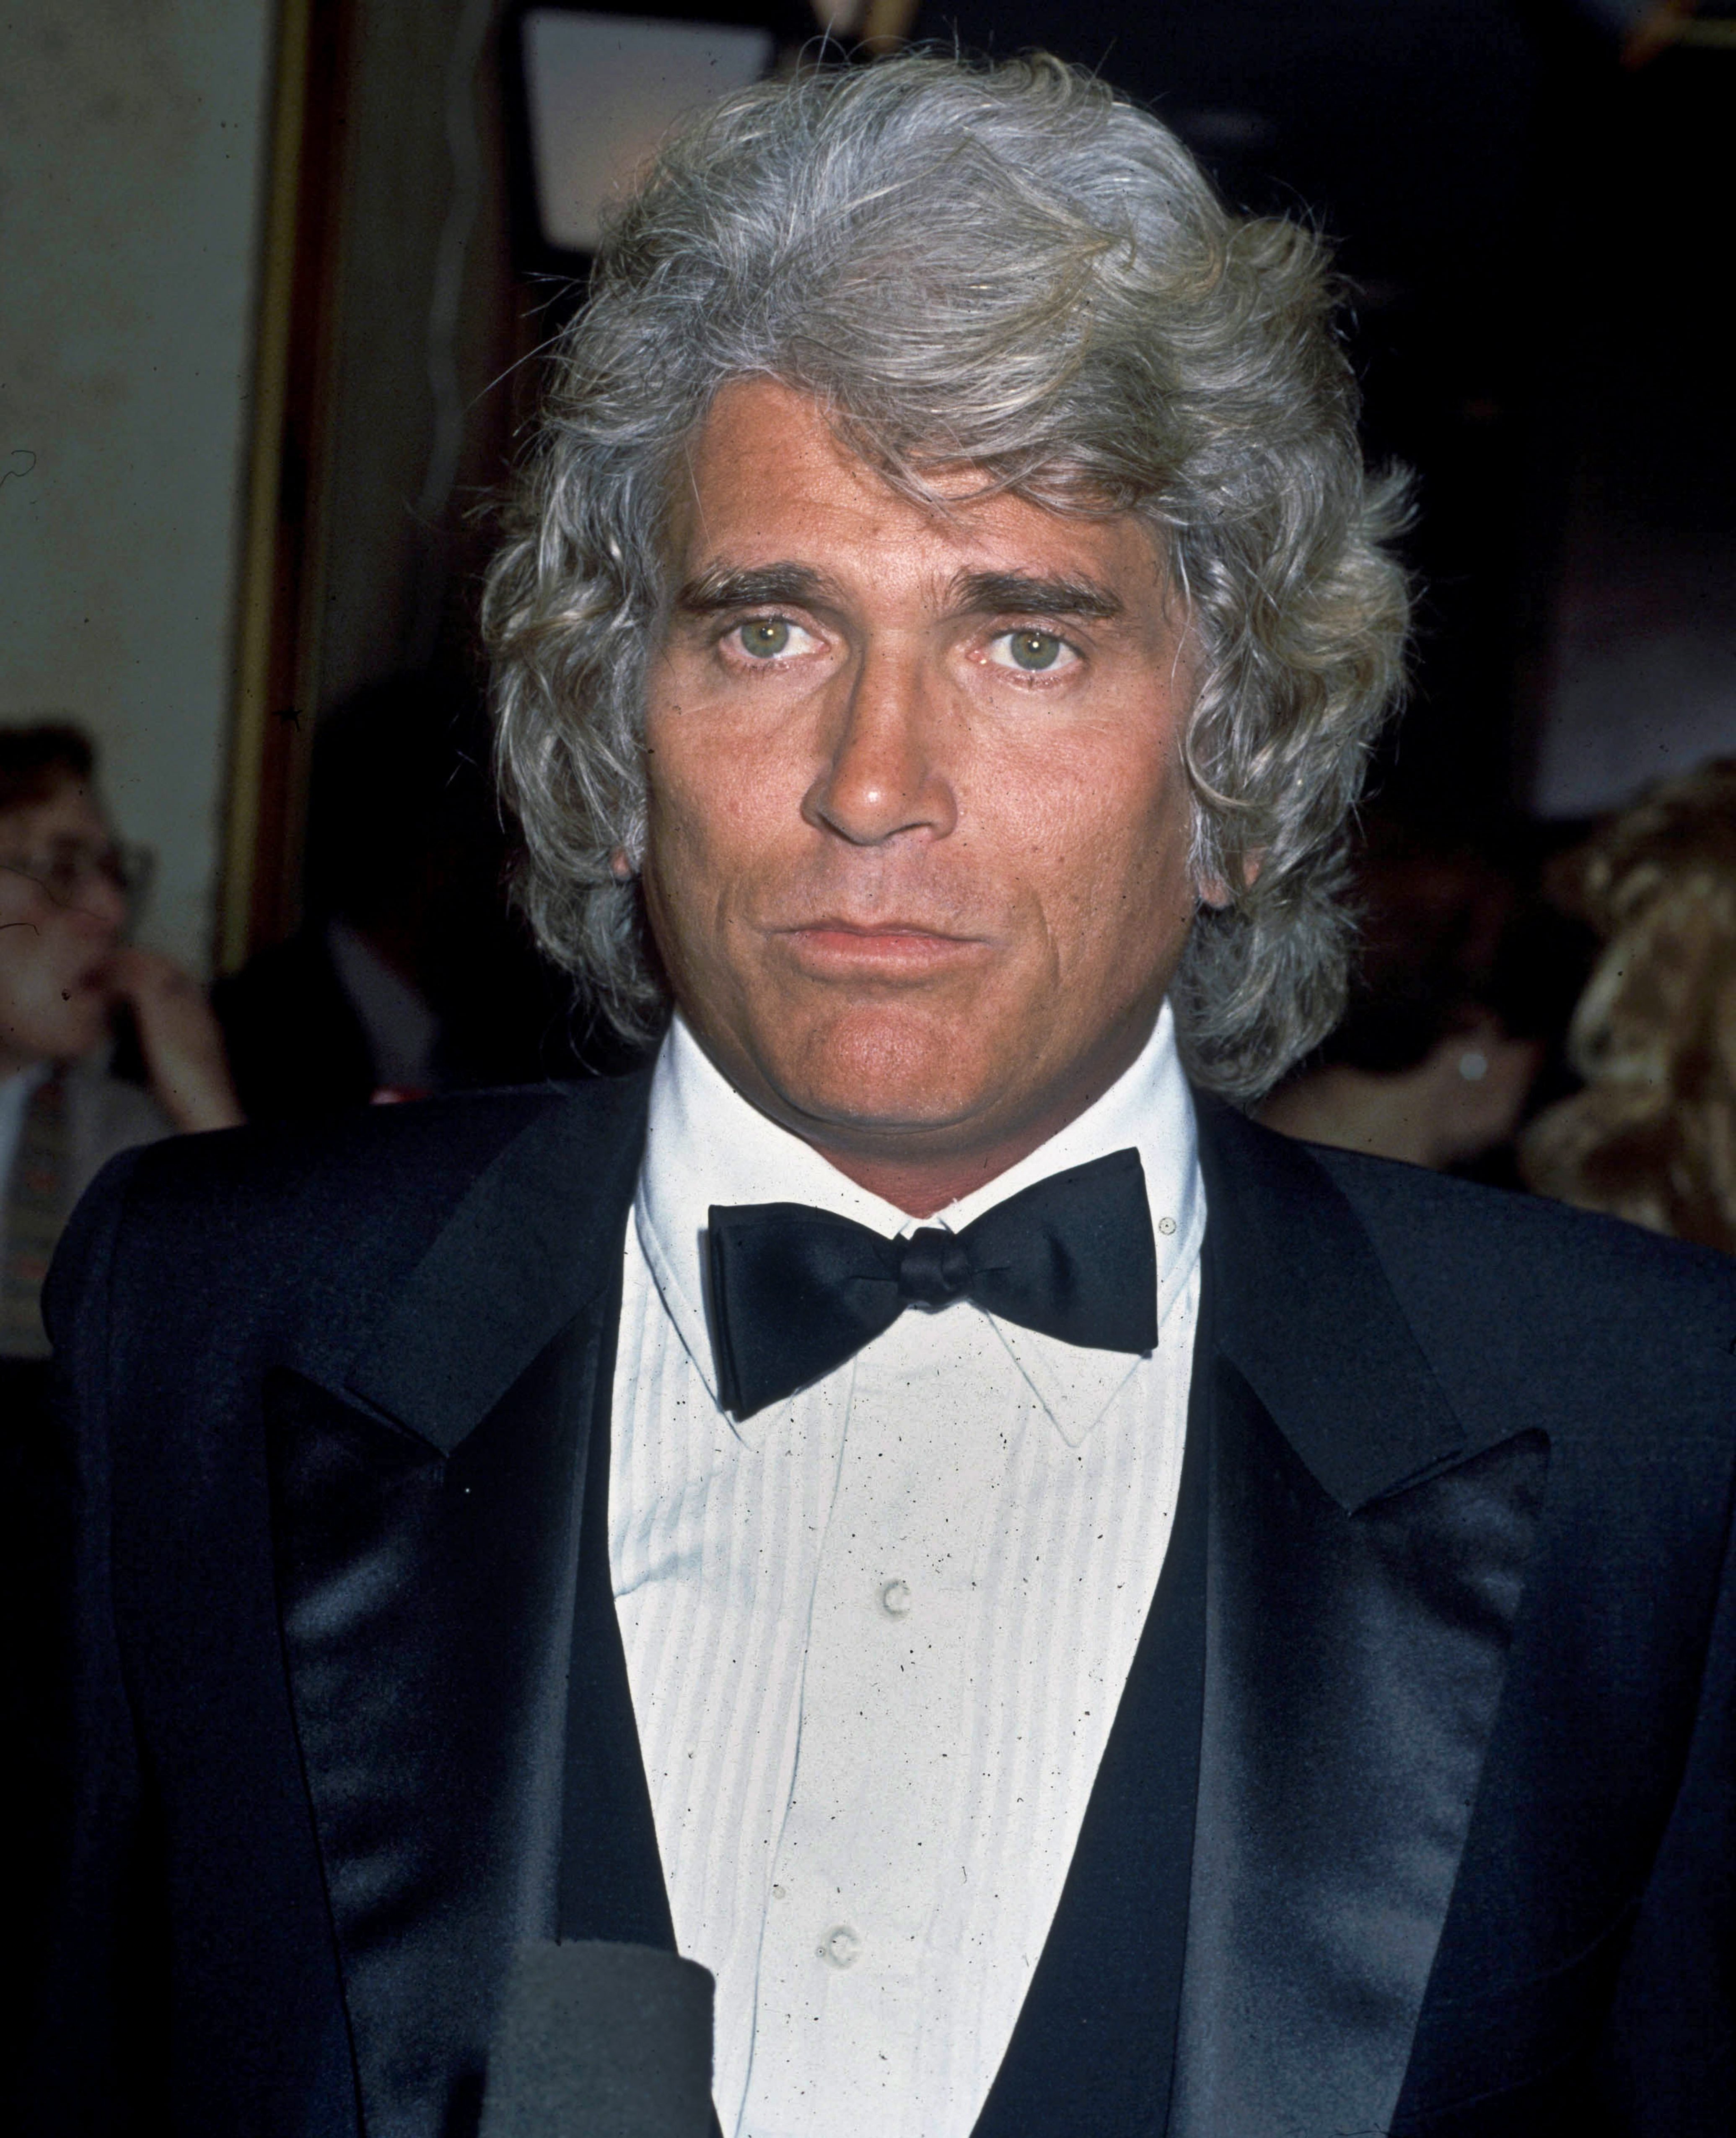 Michael Landon in Hollywood, California for circa 1990 | Photo: Getty Images